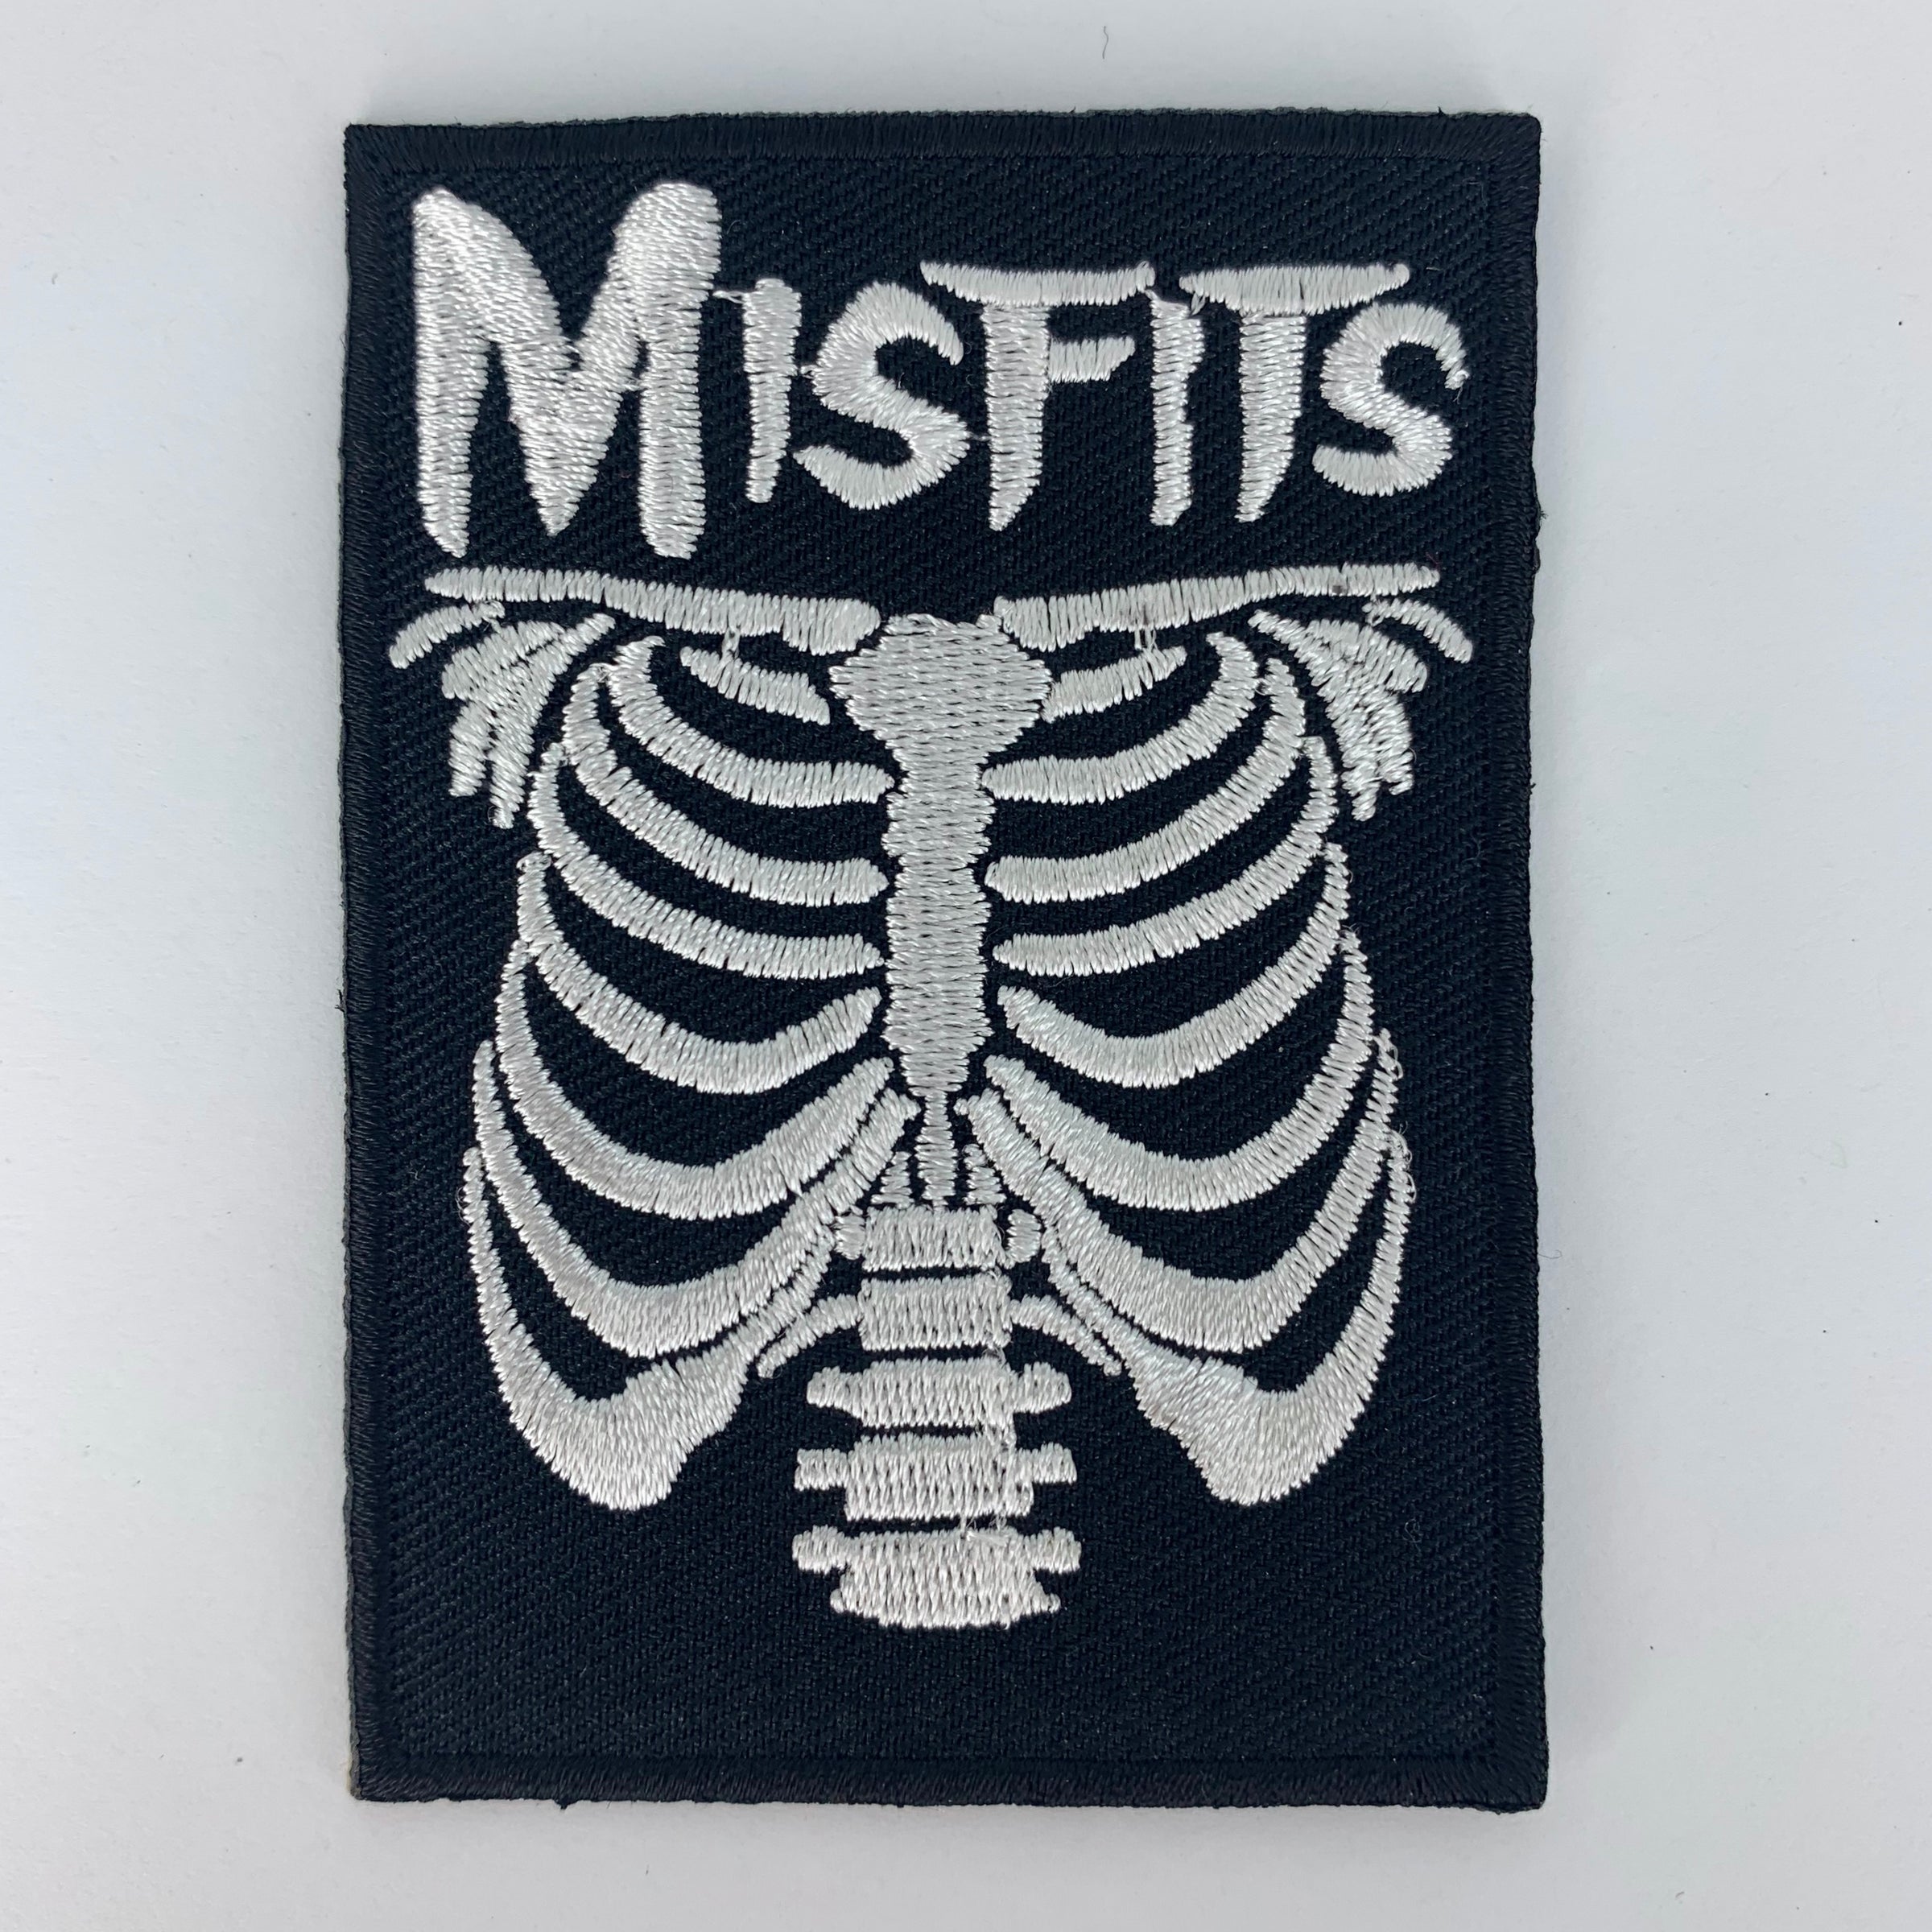 Misfits skull - embroidered patch 4x3 CM